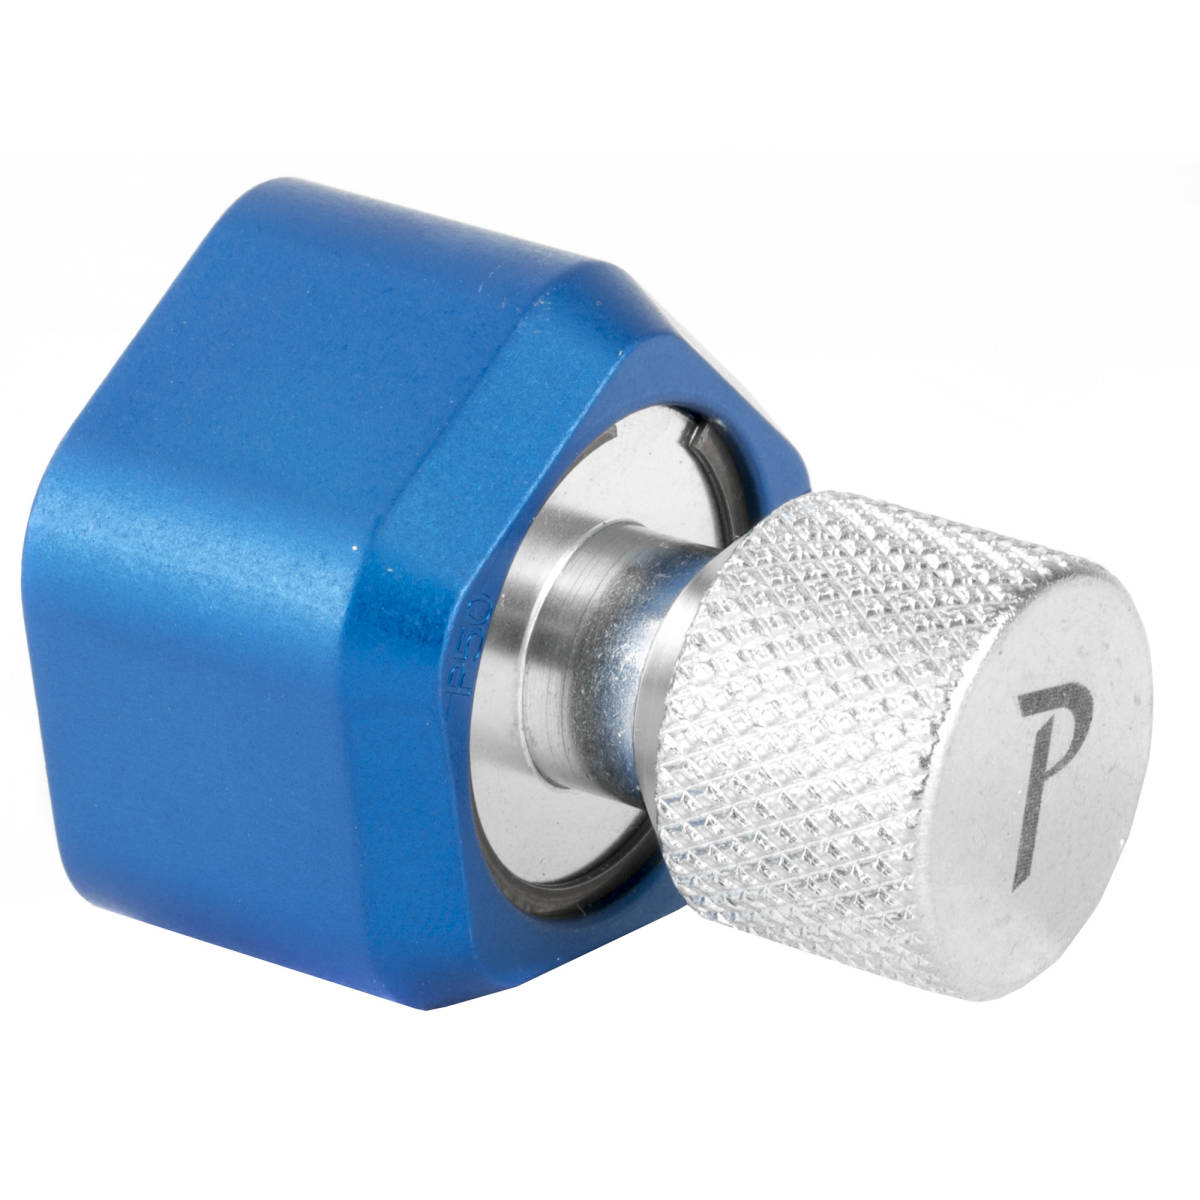 Pachmayr 02650 Competition Speedloader made of Aluminum with Blue Finish-img-1